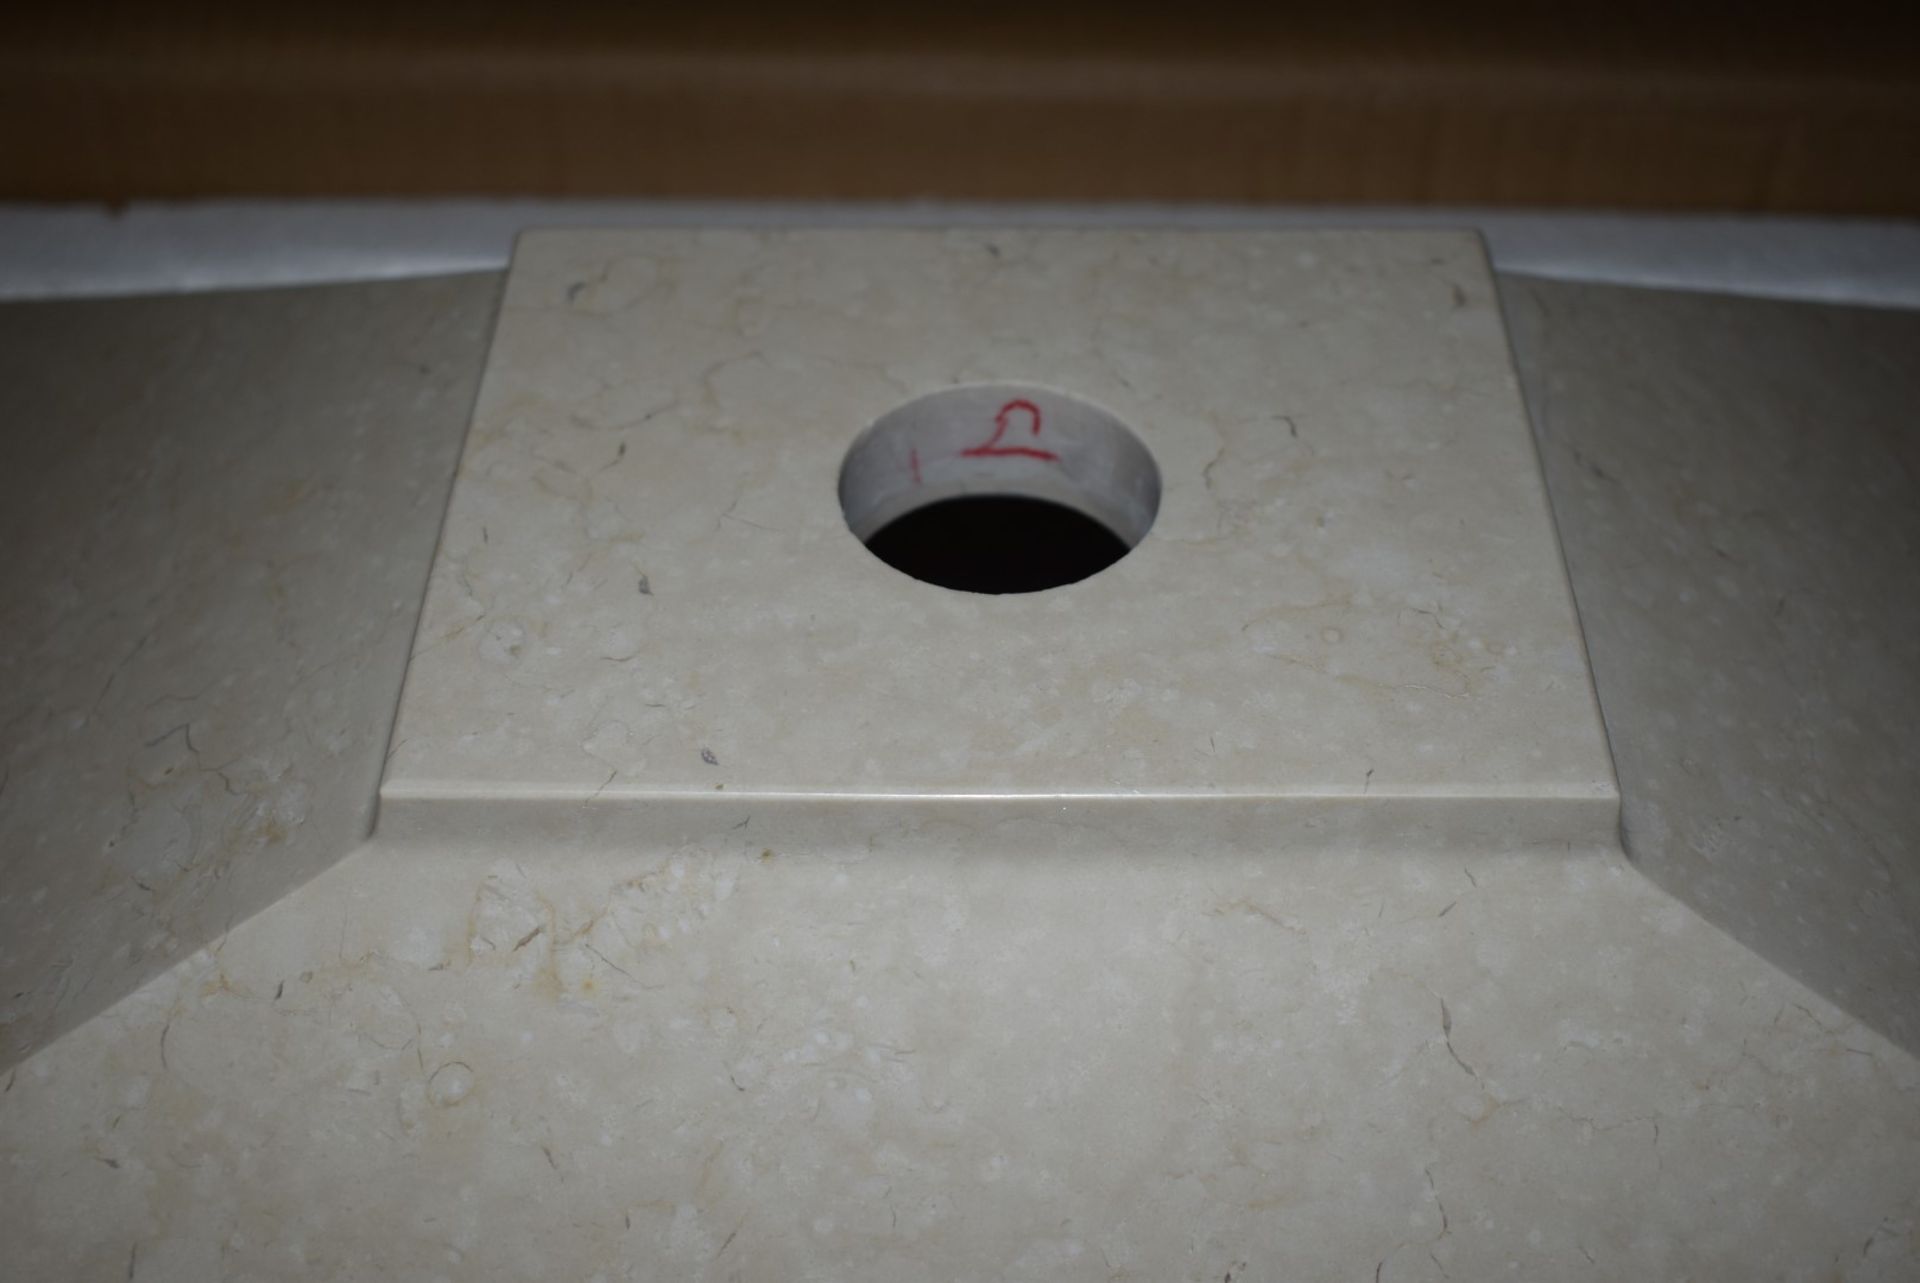 1 x Stonearth 'Karo' Solid Galala Marble Stone Countertop Sink Basin - New Boxed Stock - RRP £ - Image 7 of 8